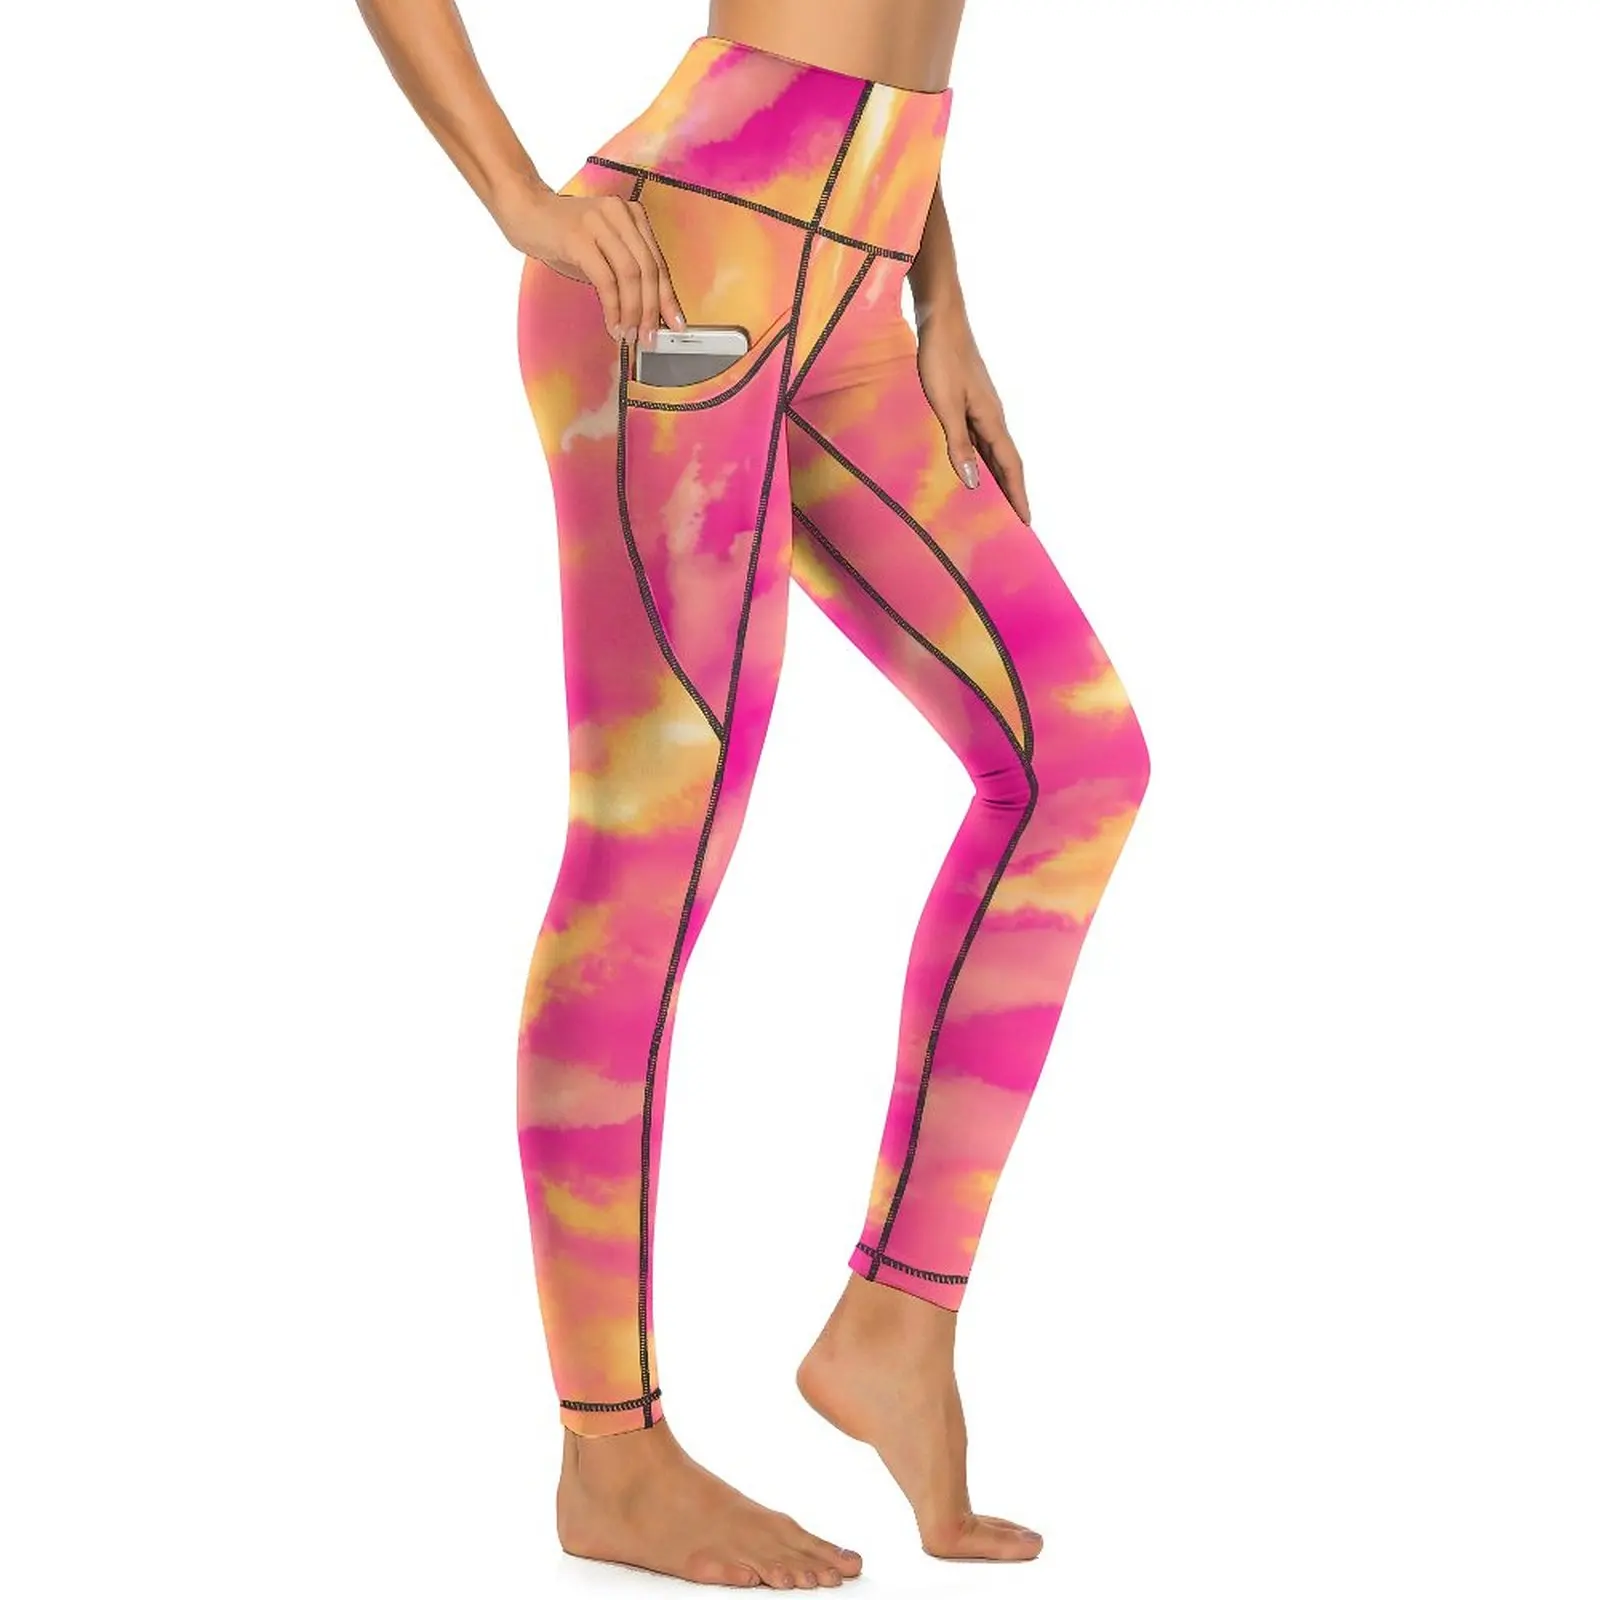 

Spiral Tie Dye Leggings Sexy Pink And Yellow High Waist Yoga Pants Fashion Quick-Dry Leggins Female Custom Fitness Sports Tights